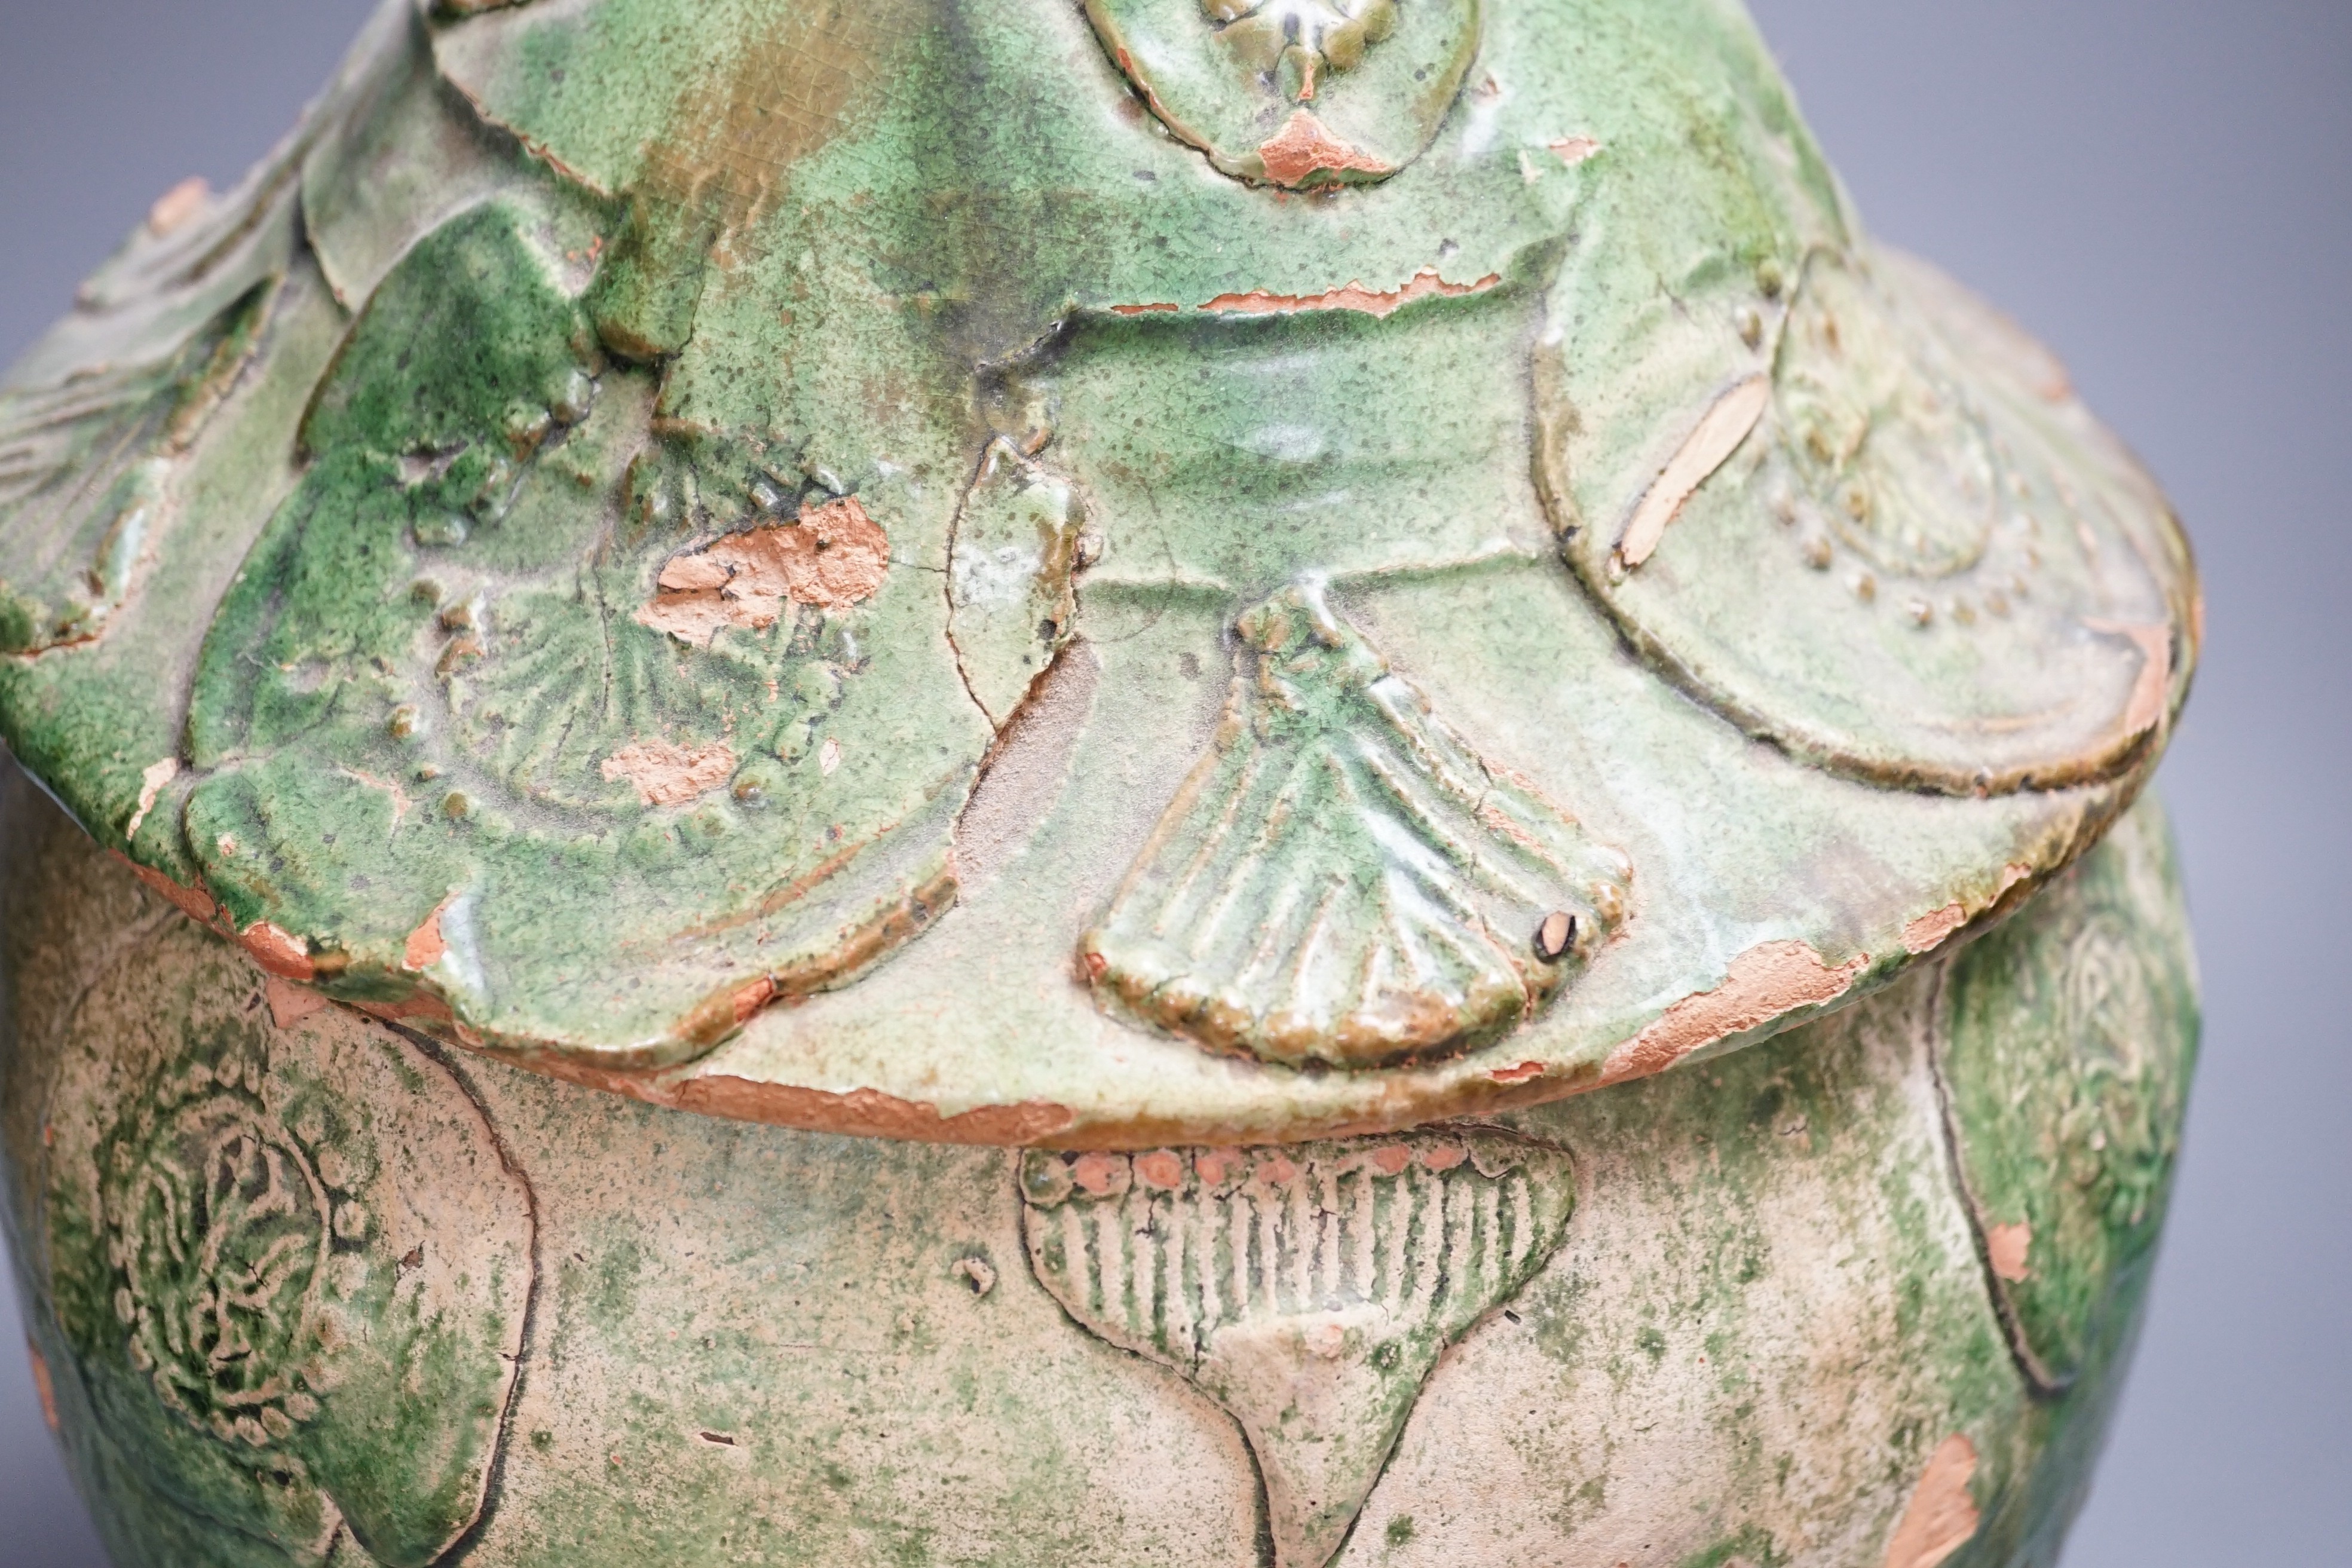 A large Chinese green glazed jar and cover, Liao dynasty, 35cm high